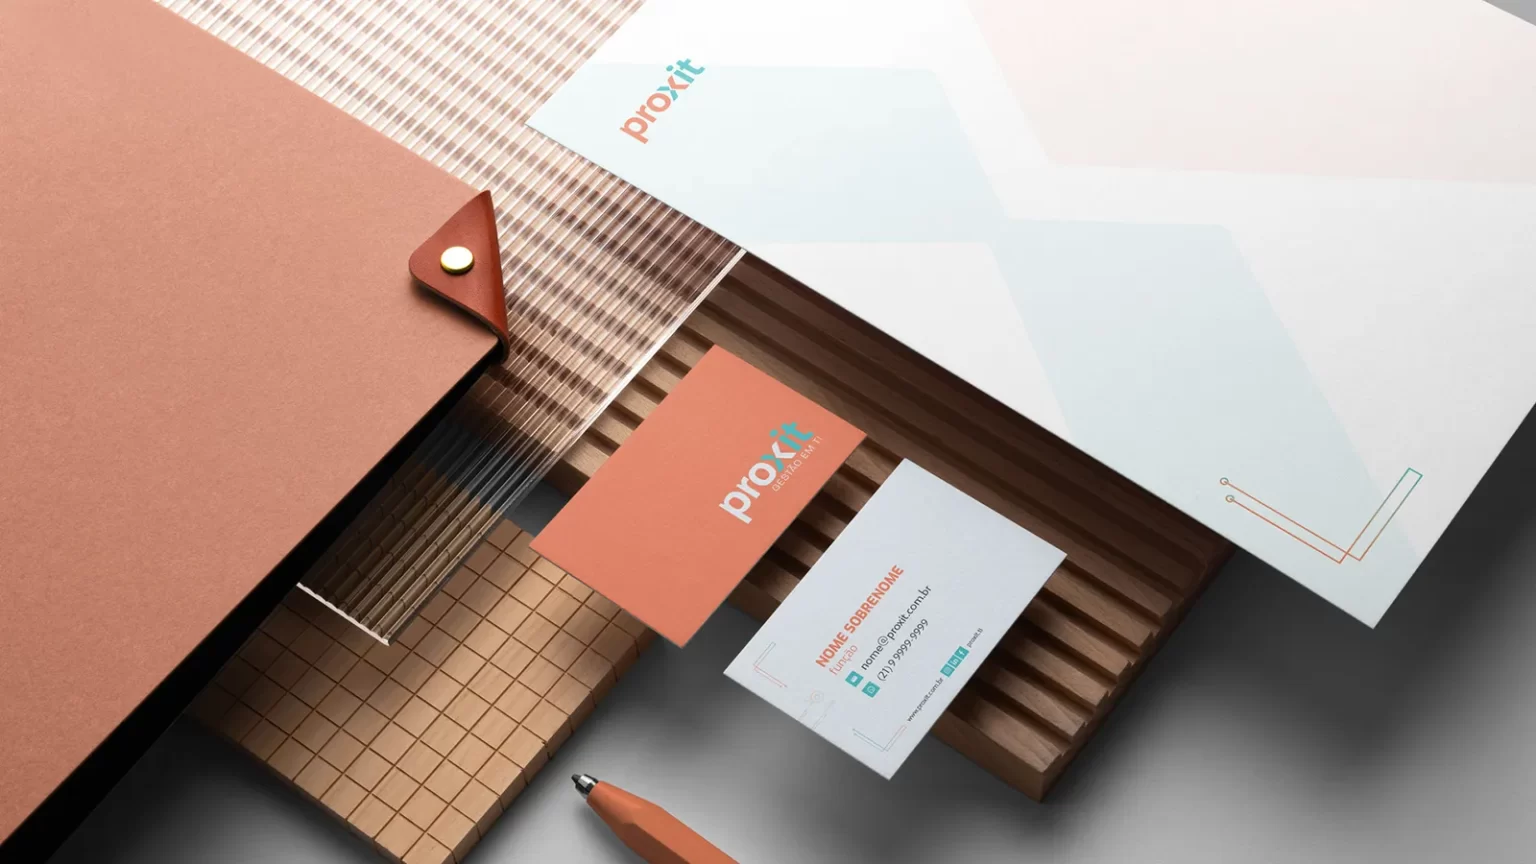 A set of business cards and a pen on a wooden table, showcasing brand design.